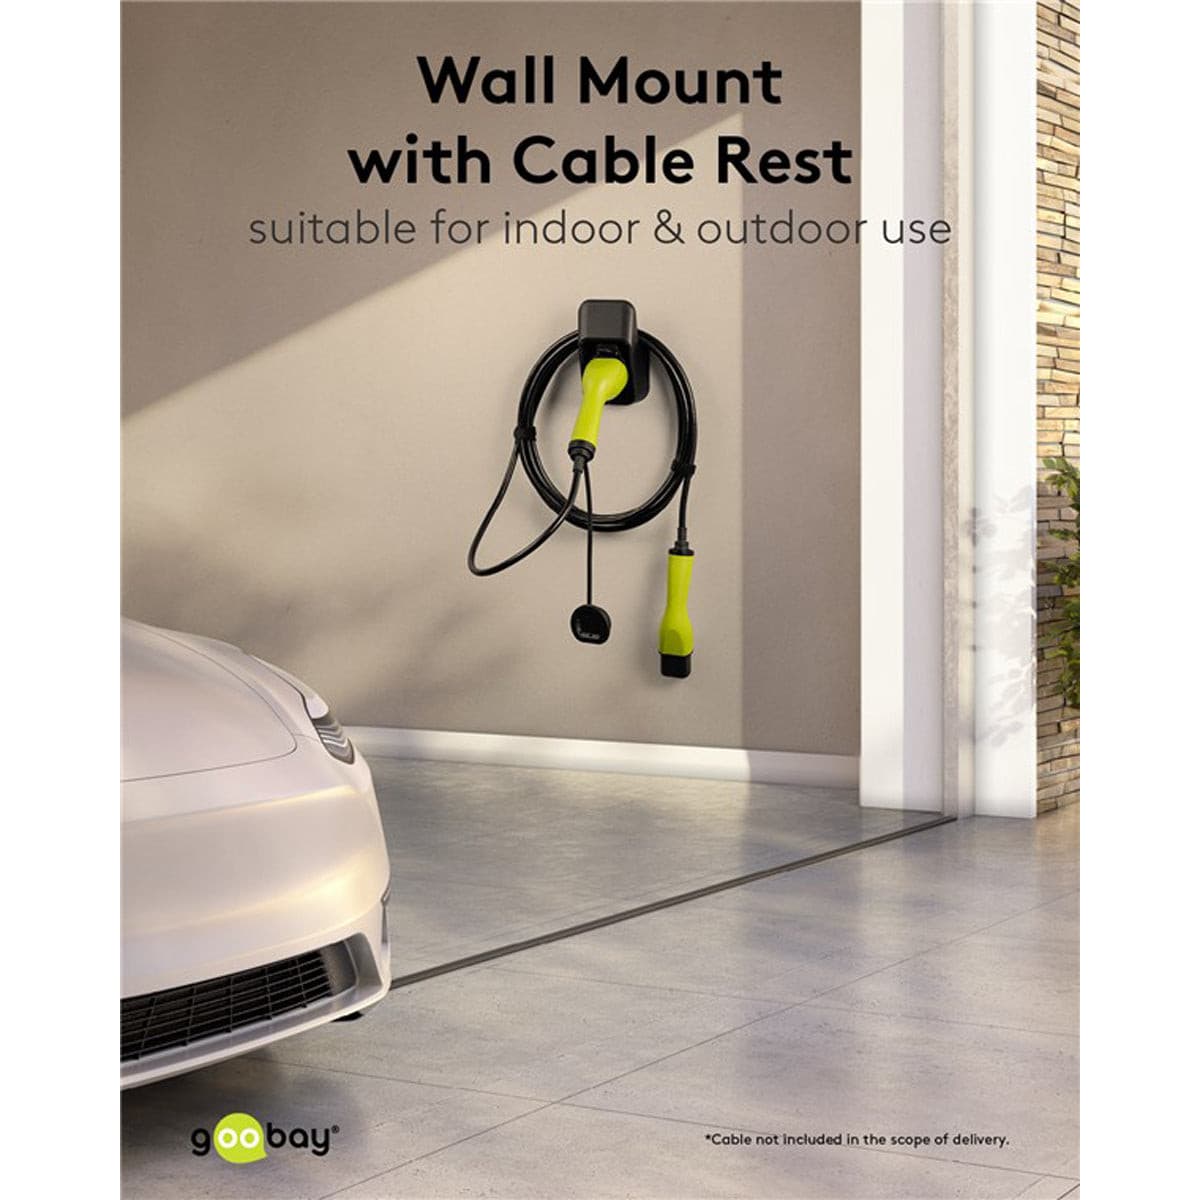 Goobay Wall Mount with Cable Rest for EV Type 2 Charging Cable - Black.